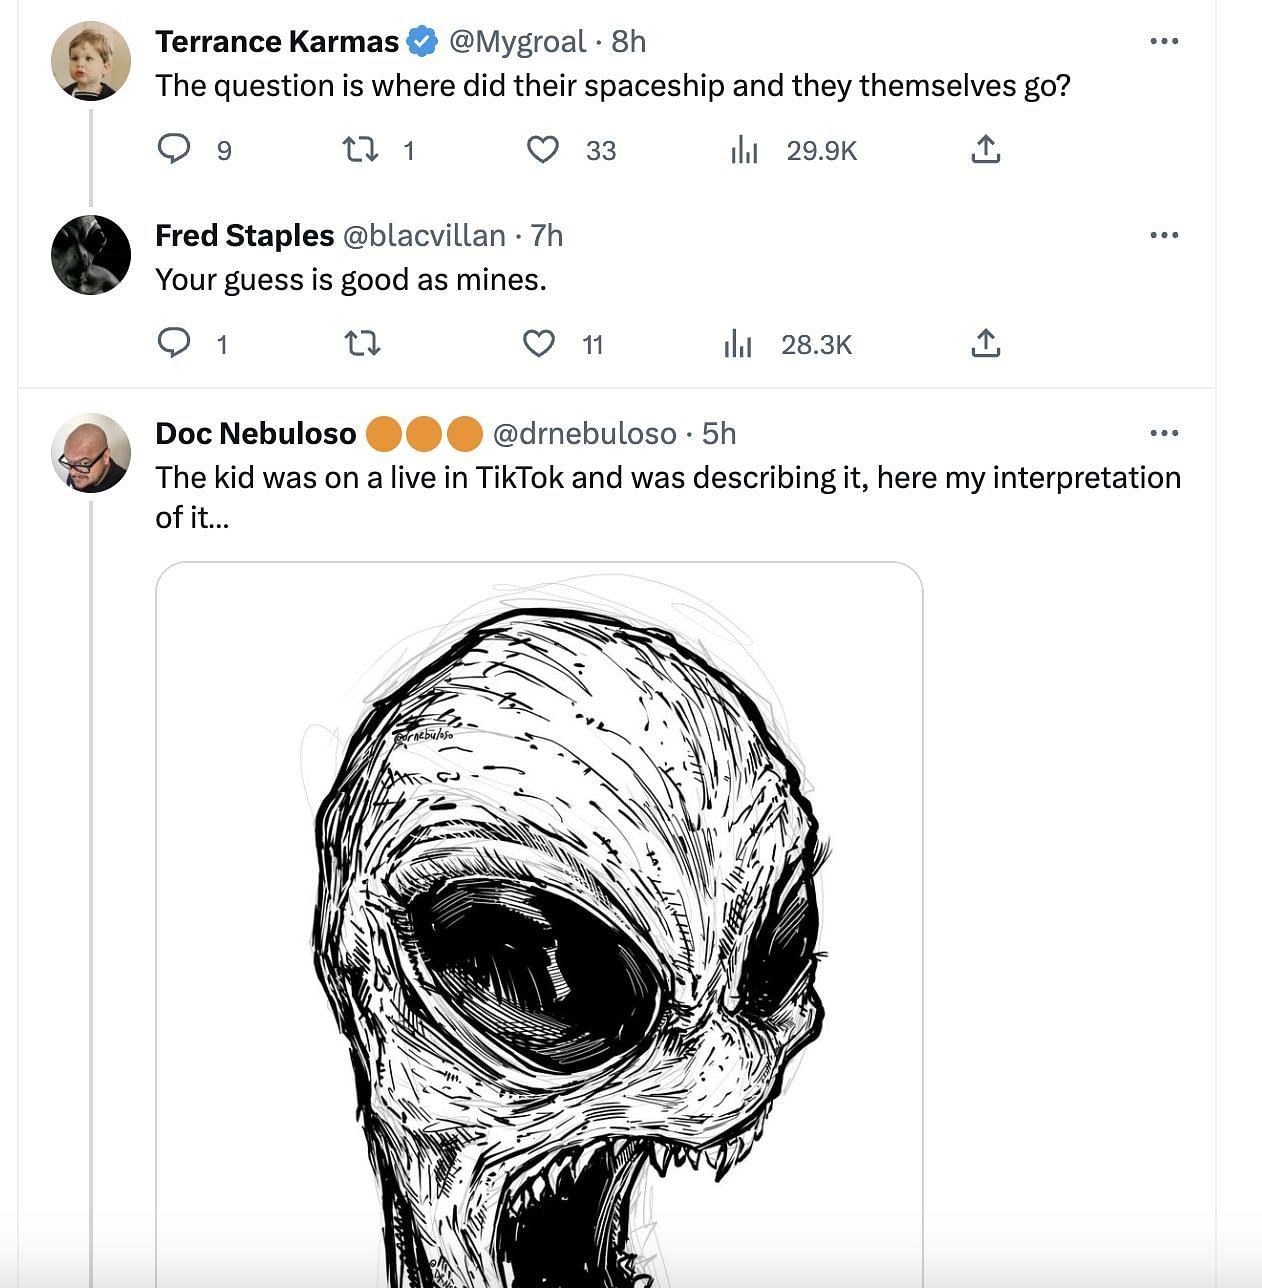 Social media users share reactions as a video featuring extraterrestrial creatures makes way on the internet. (Image via Twitter)